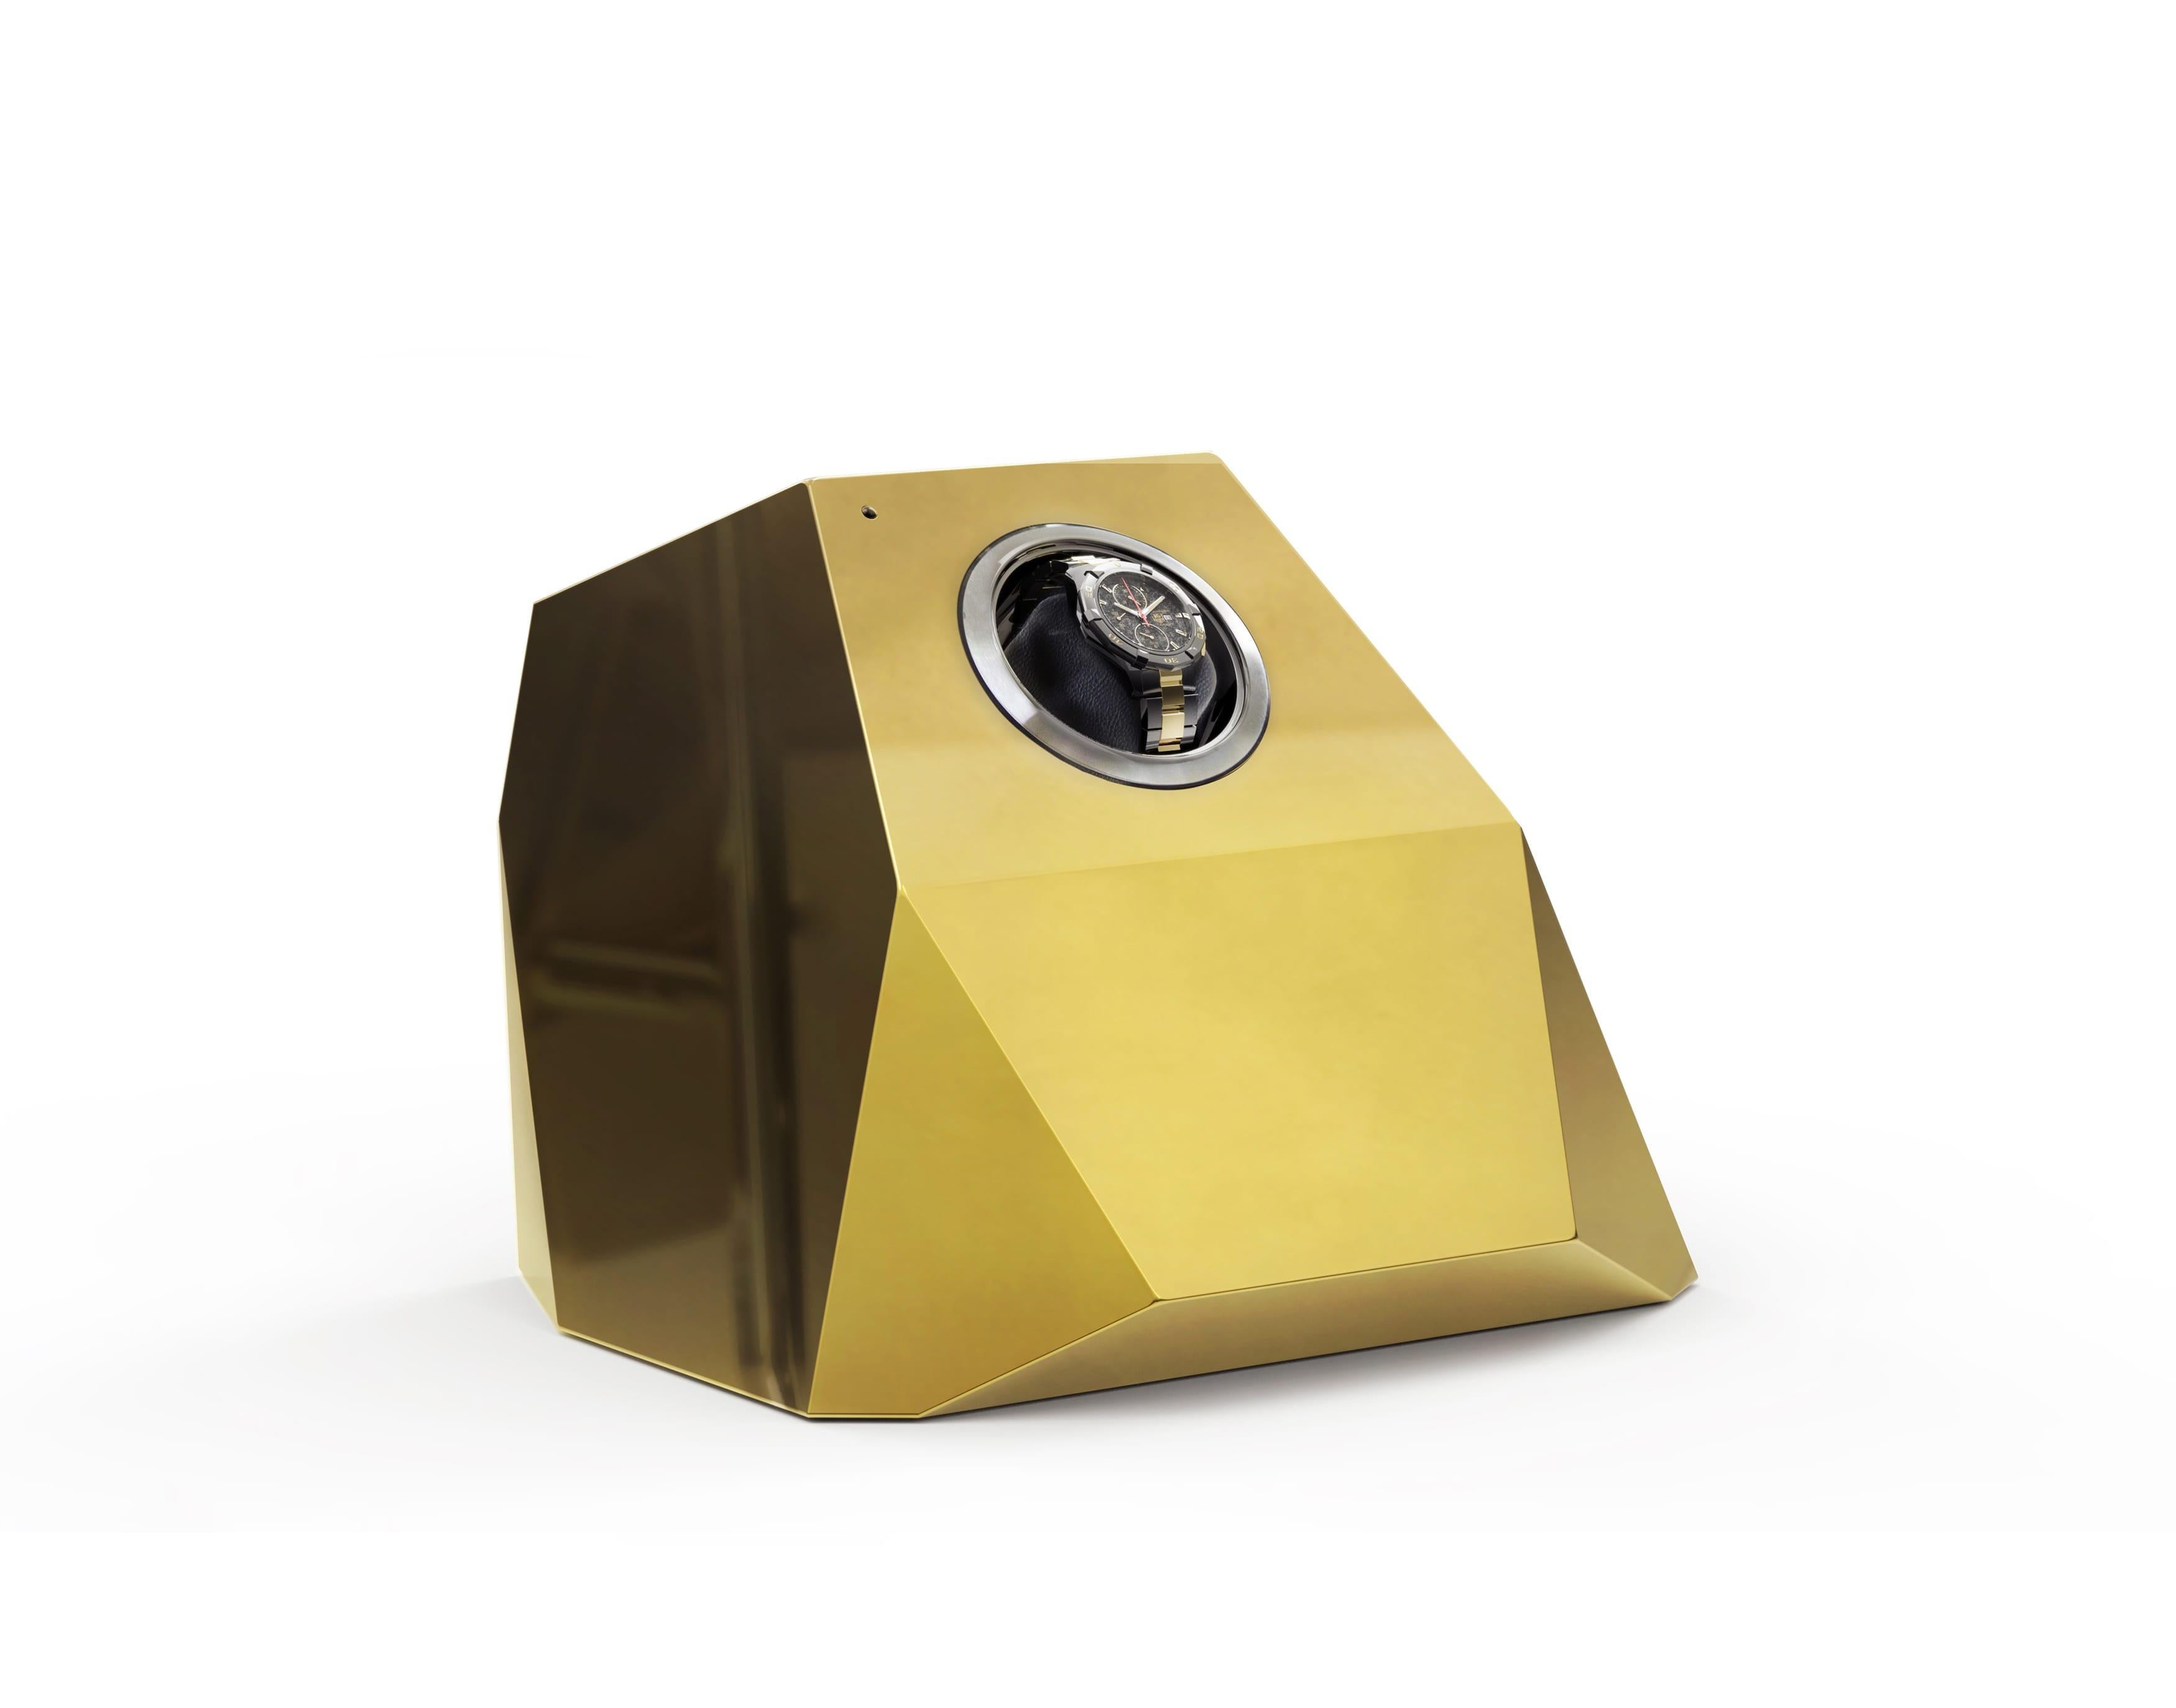 The Diamond design piece reinterprets the quintessential diamond shape throughout contemporary design, a beautiful outcome of architectural thinking with elegant faceted lines. A single module watch winder that provides proper care and secure